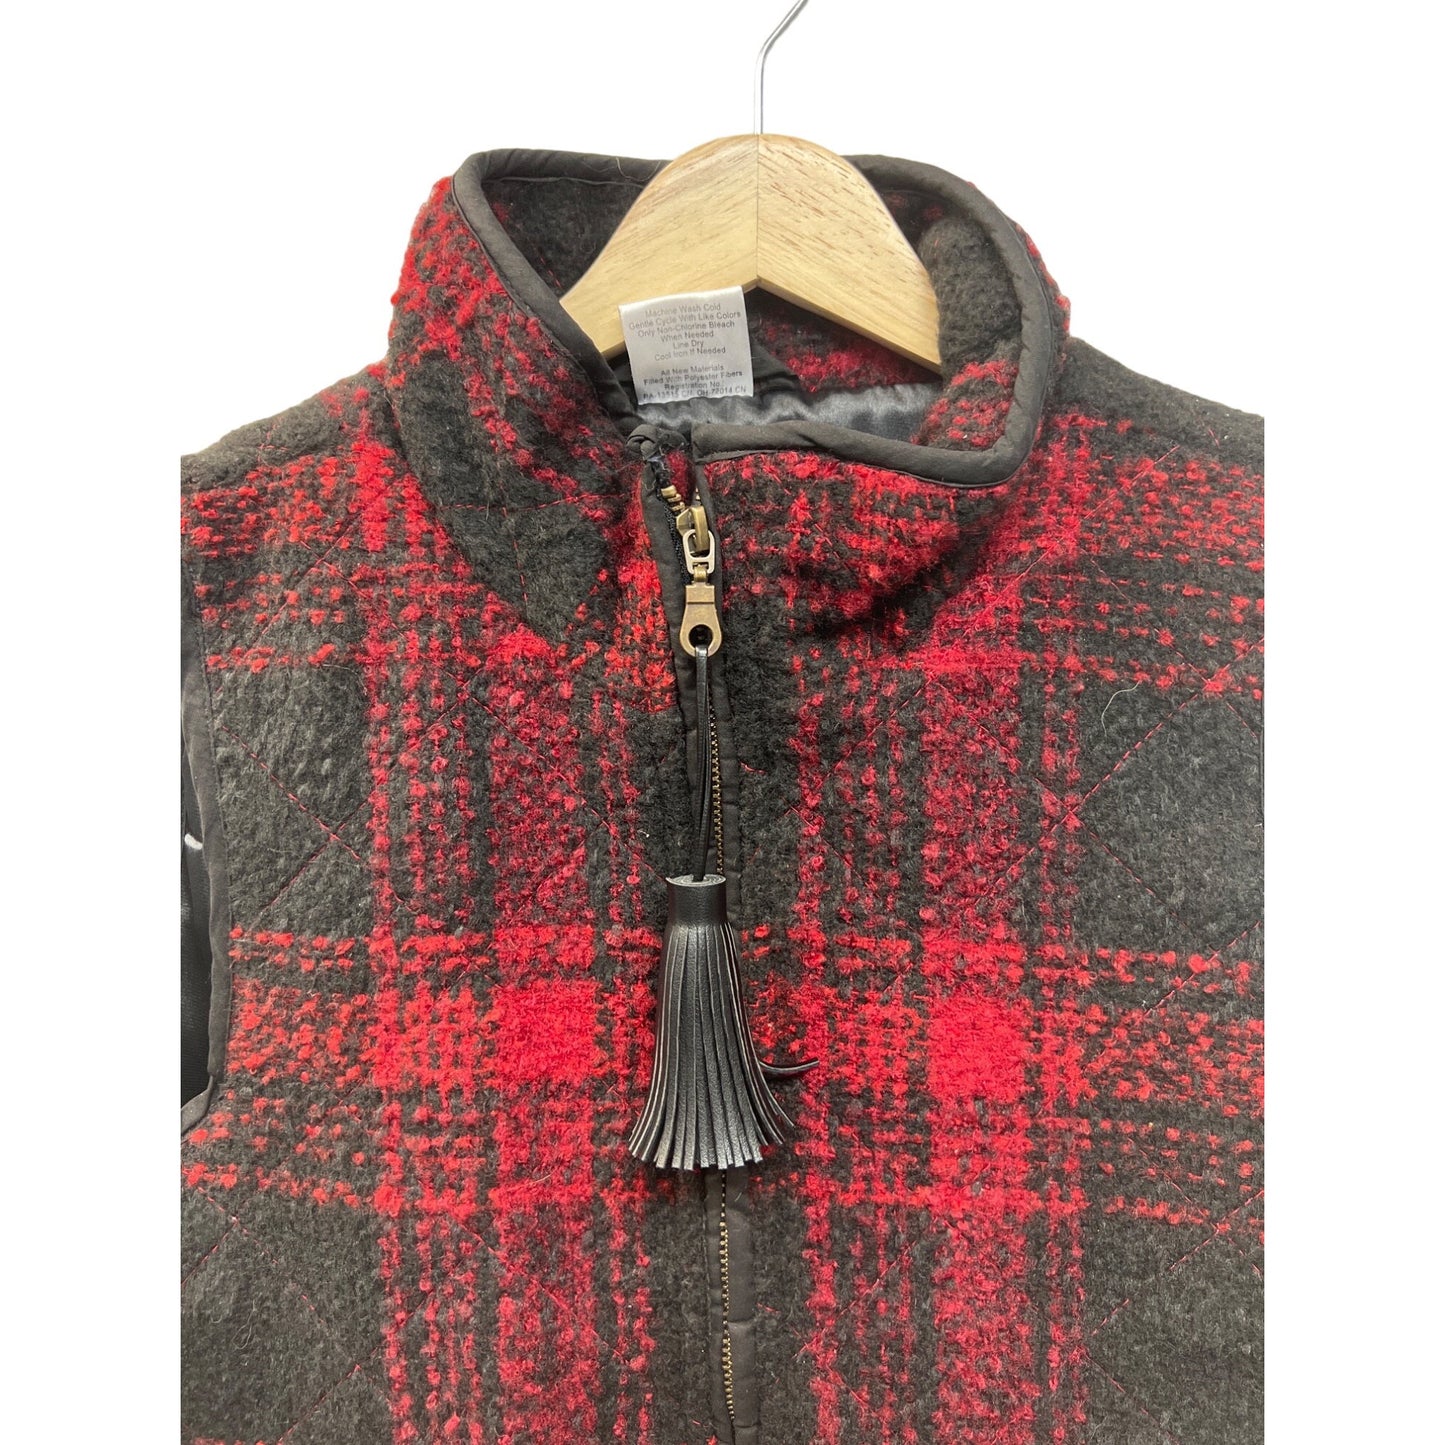 Unbranded Red and Black Plaid Quilted Vest with Faux Leather Tassel